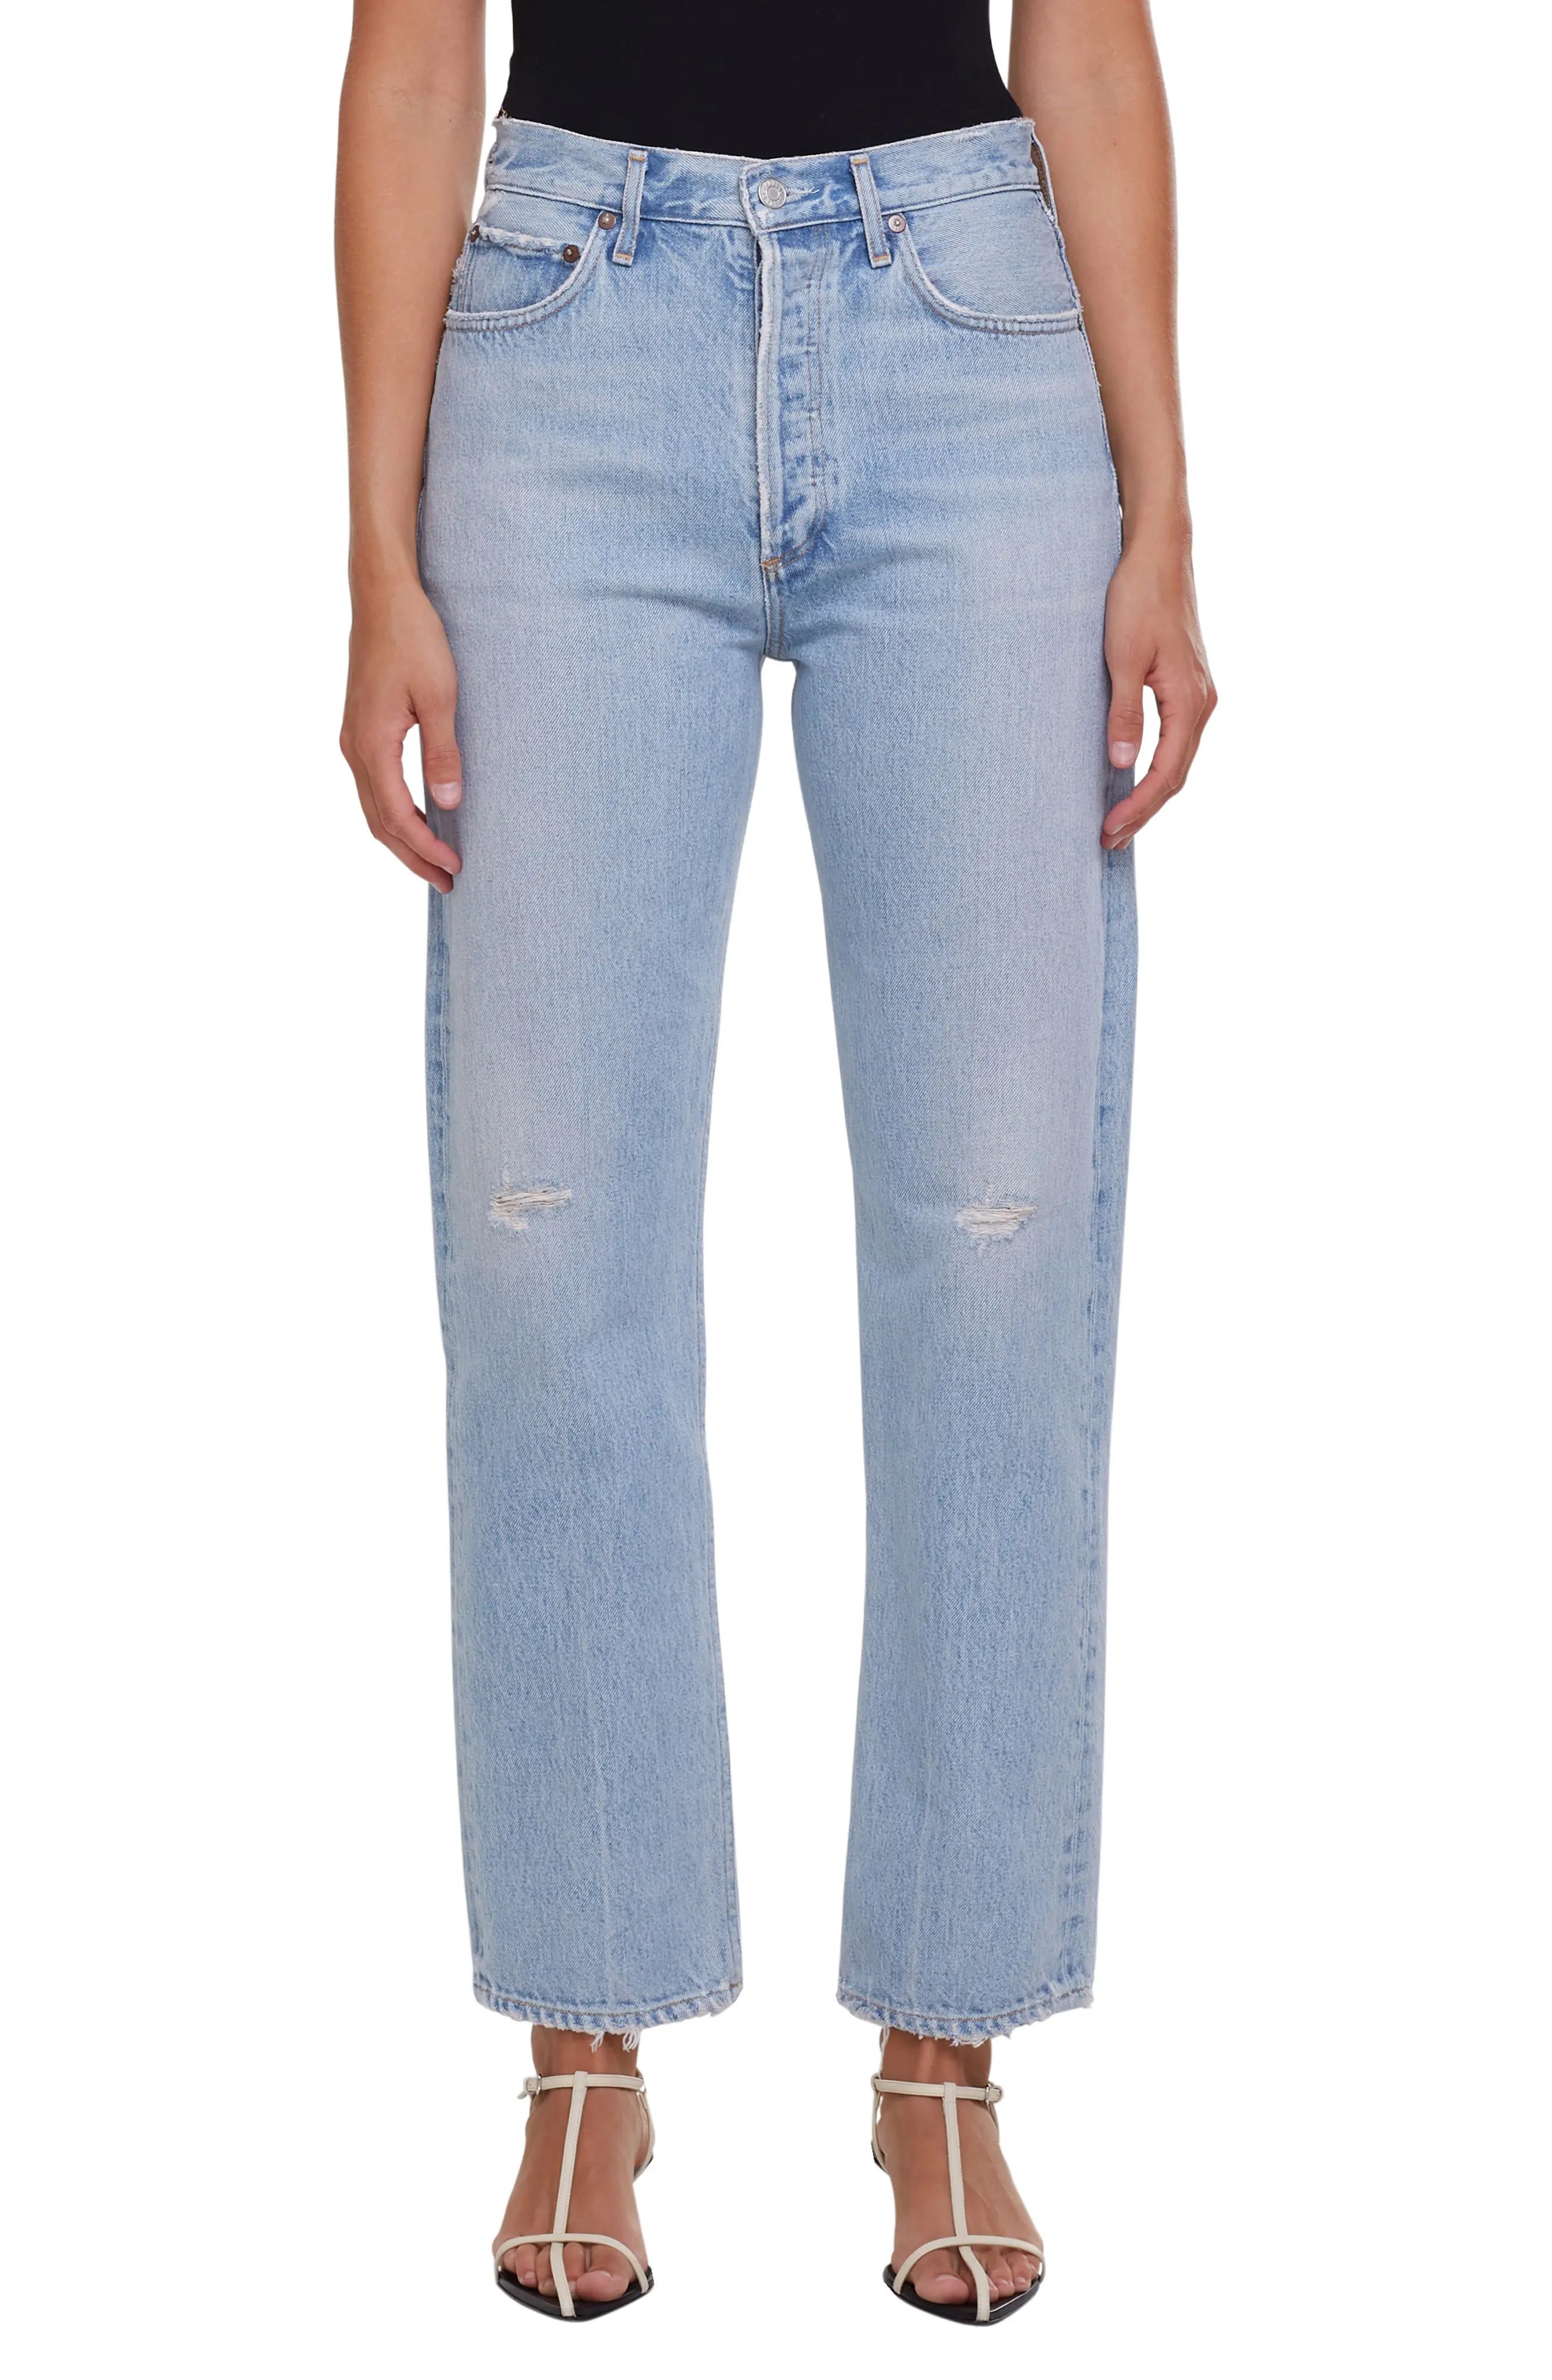 AGOLDE '90s Pinch Waist High Waist Jeans in Flashback at Nordstrom, Size 32 | Nordstrom